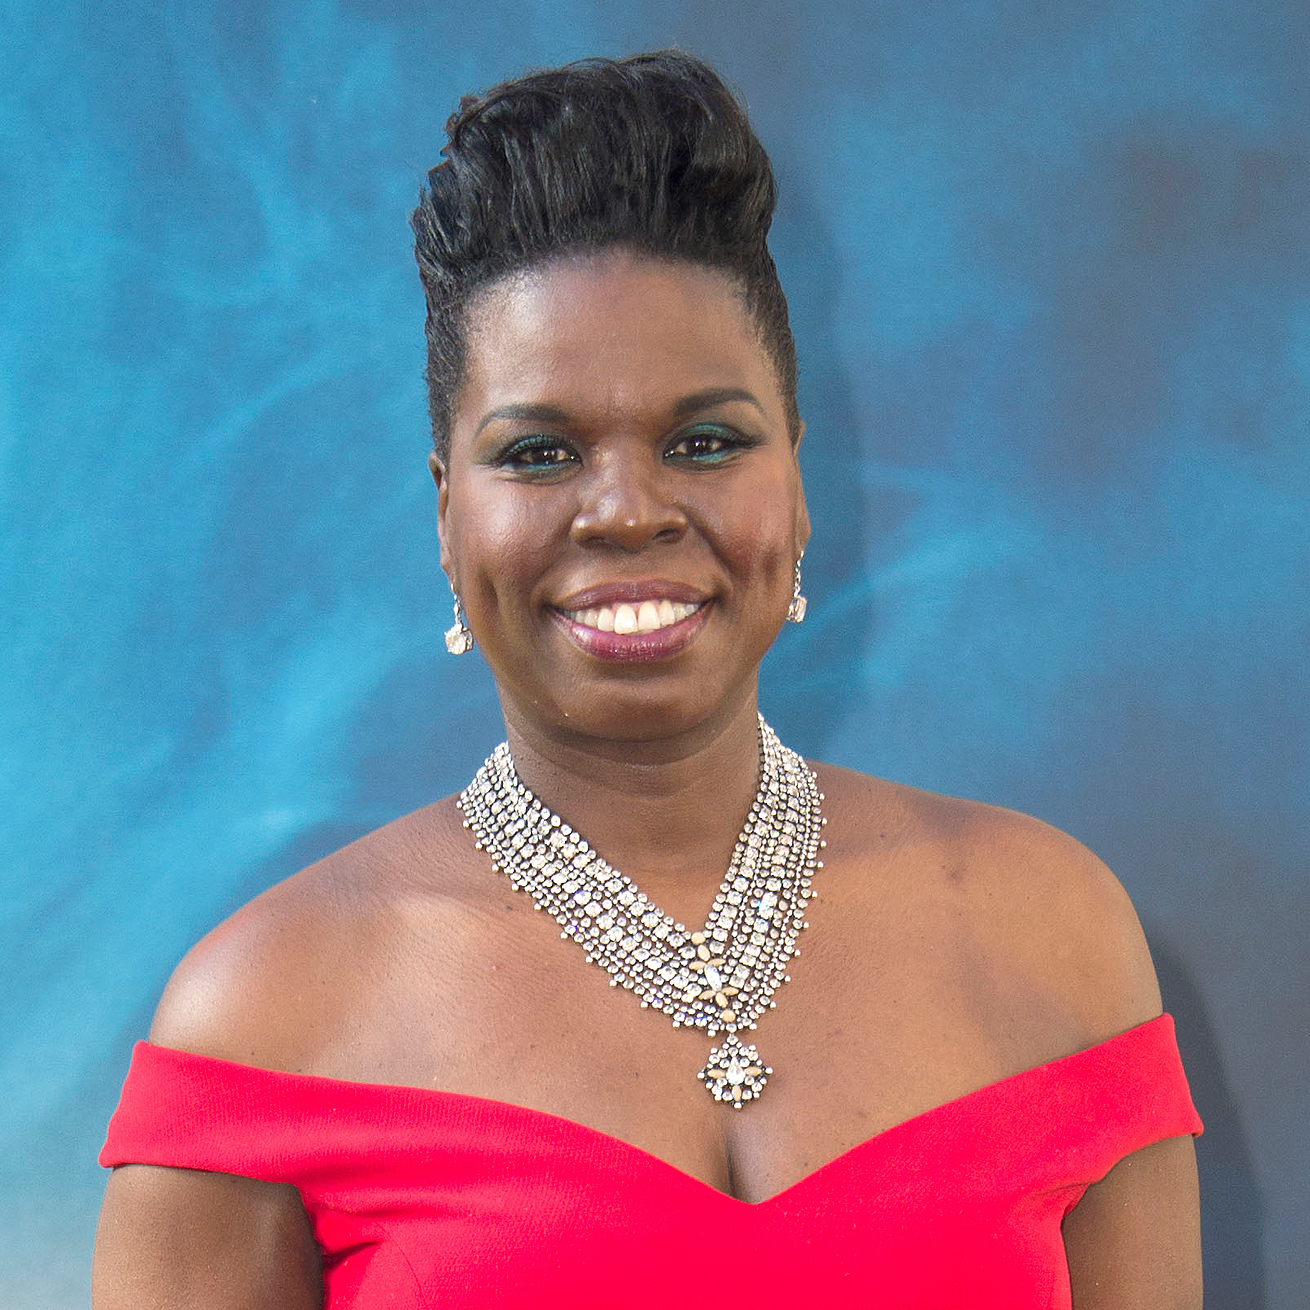 Dannijo Crystal Collar necklace seen modeled by Leslie Jones at the Oscars